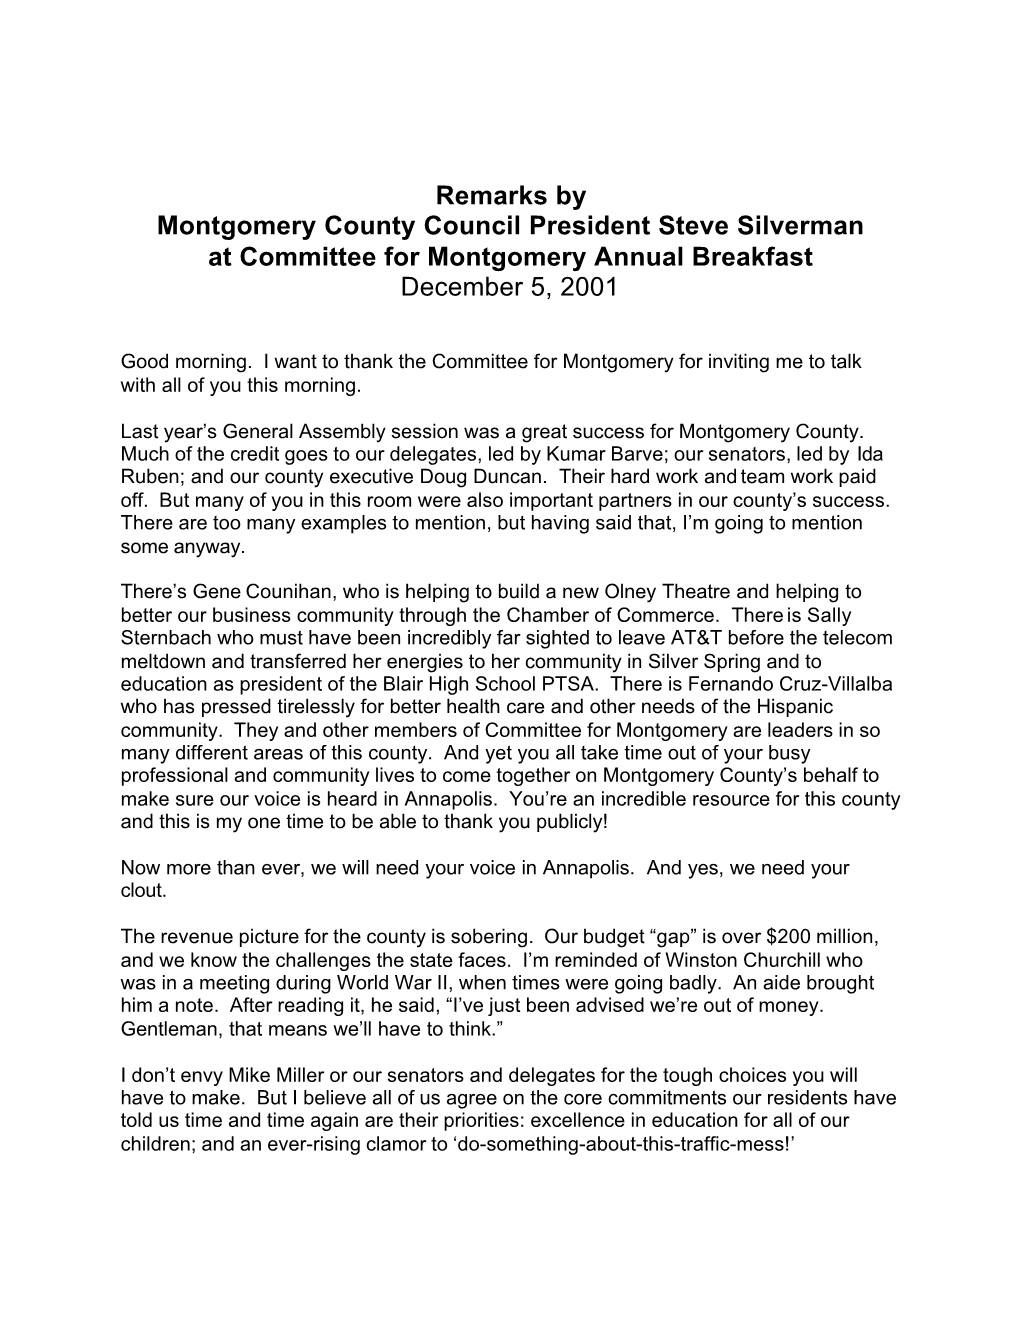 Remarks by Montgomery County Council President Steve Silverman at Committee for Montgomery Annual Breakfast December 5, 2001